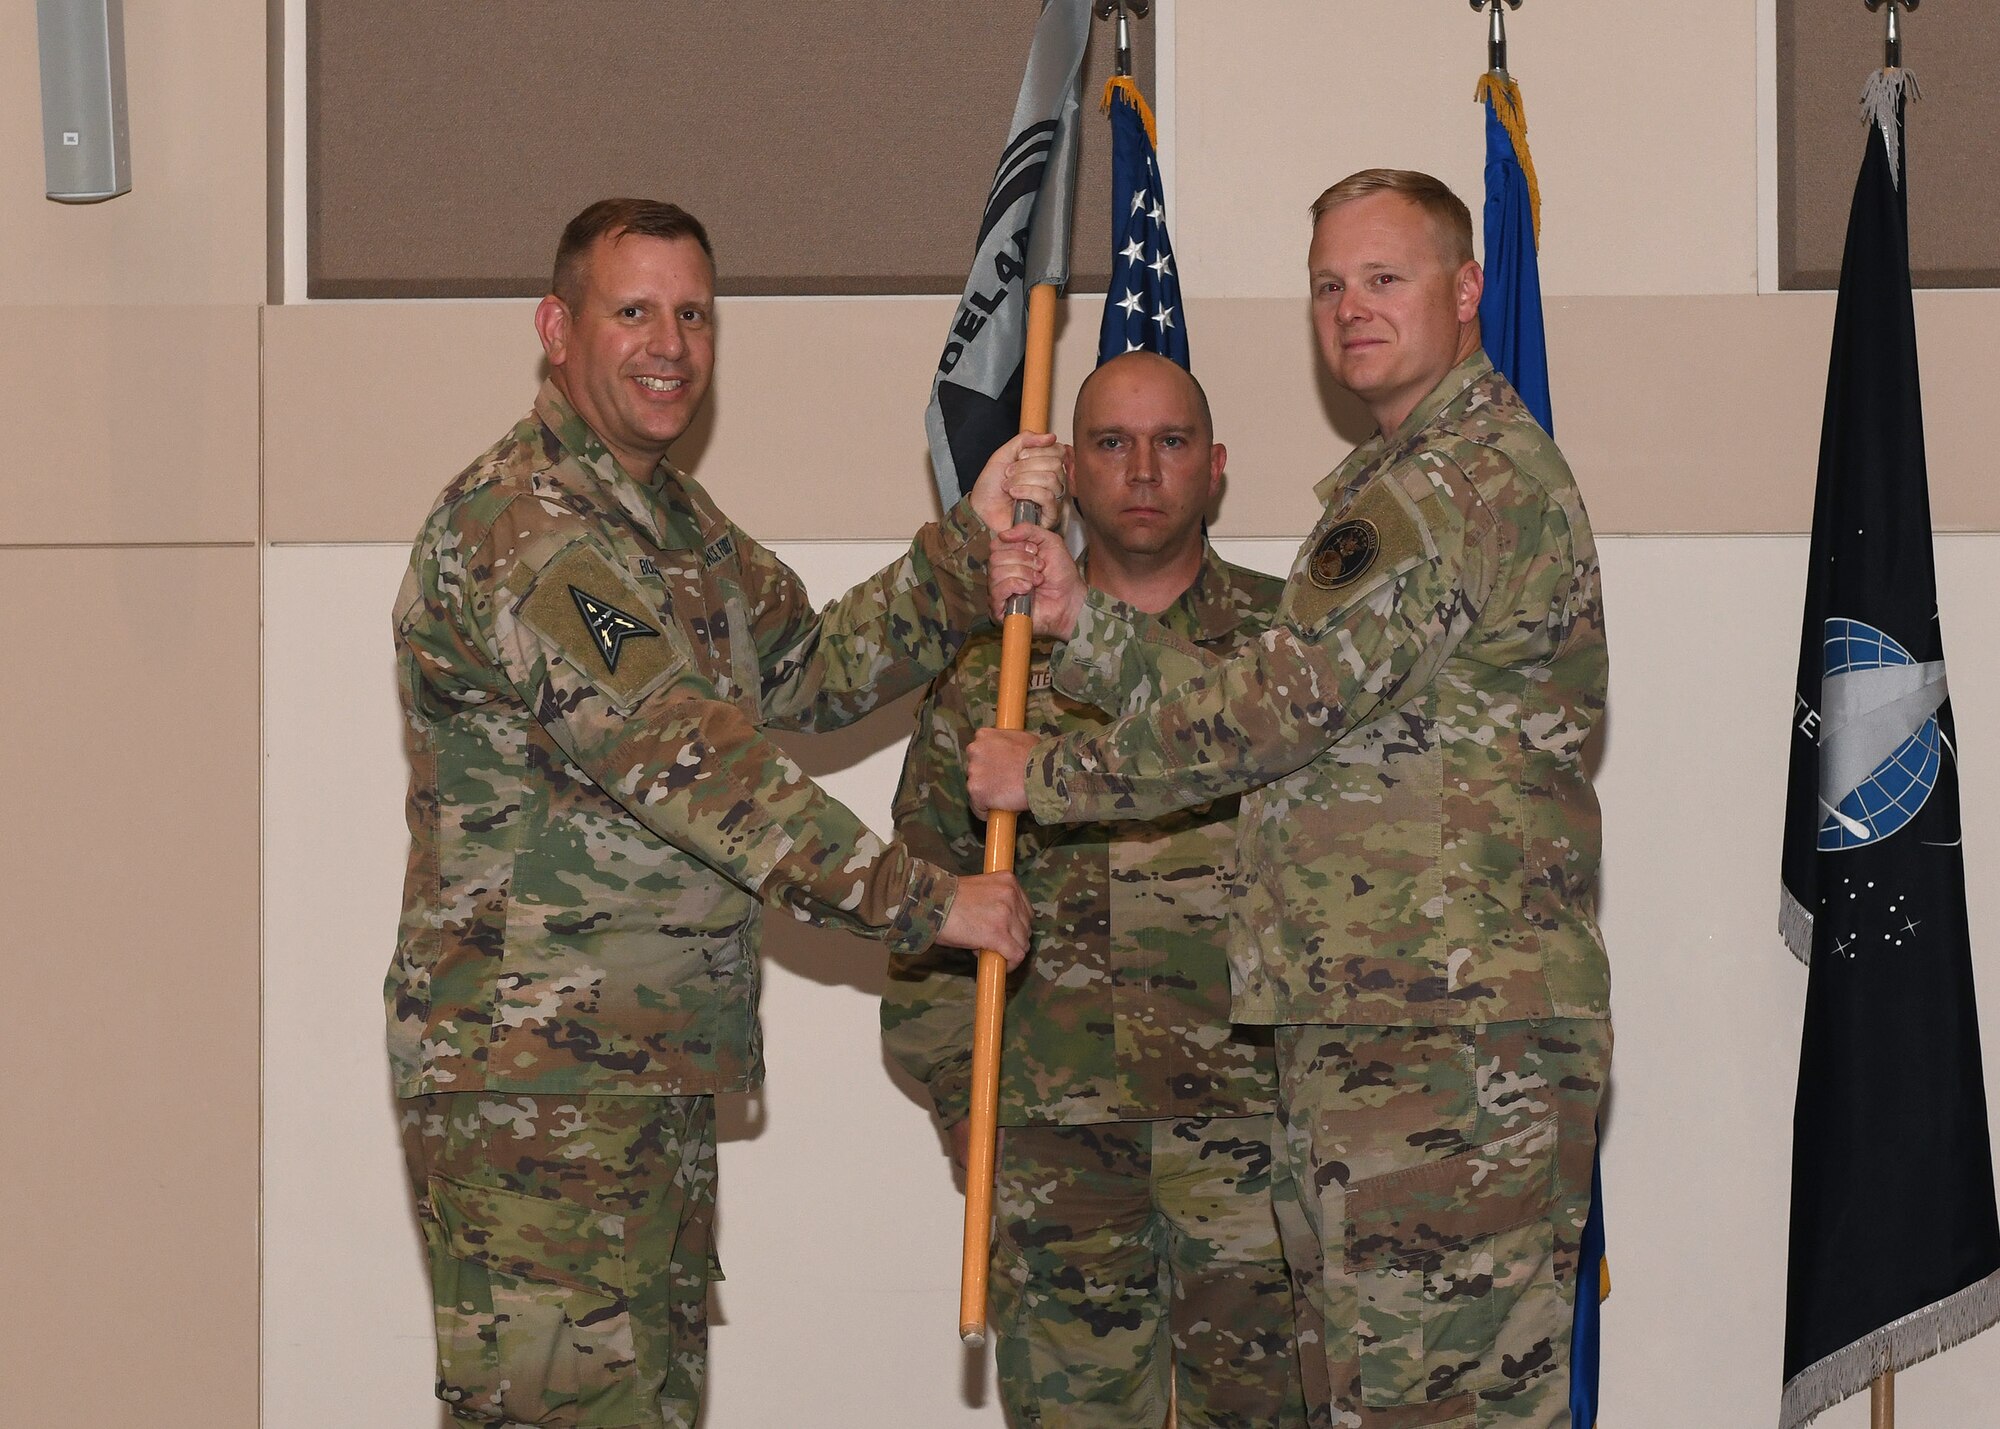 Maj. Luke Basham, incoming Space Delta 4, Detachment 1 commander, receives the guidon from Col. Richard Bourquin, DEL 4 commander, during a change of command ceremony at Buckley Space Force Base, Colo., June 24, 2021. The passing of the guidon is a military tradition that symbolizes a transfer of command and commemorates past leadership and success of the outgoing commander. (U.S. Space Force photo by Airman 1st Class Haley N. Blevins)